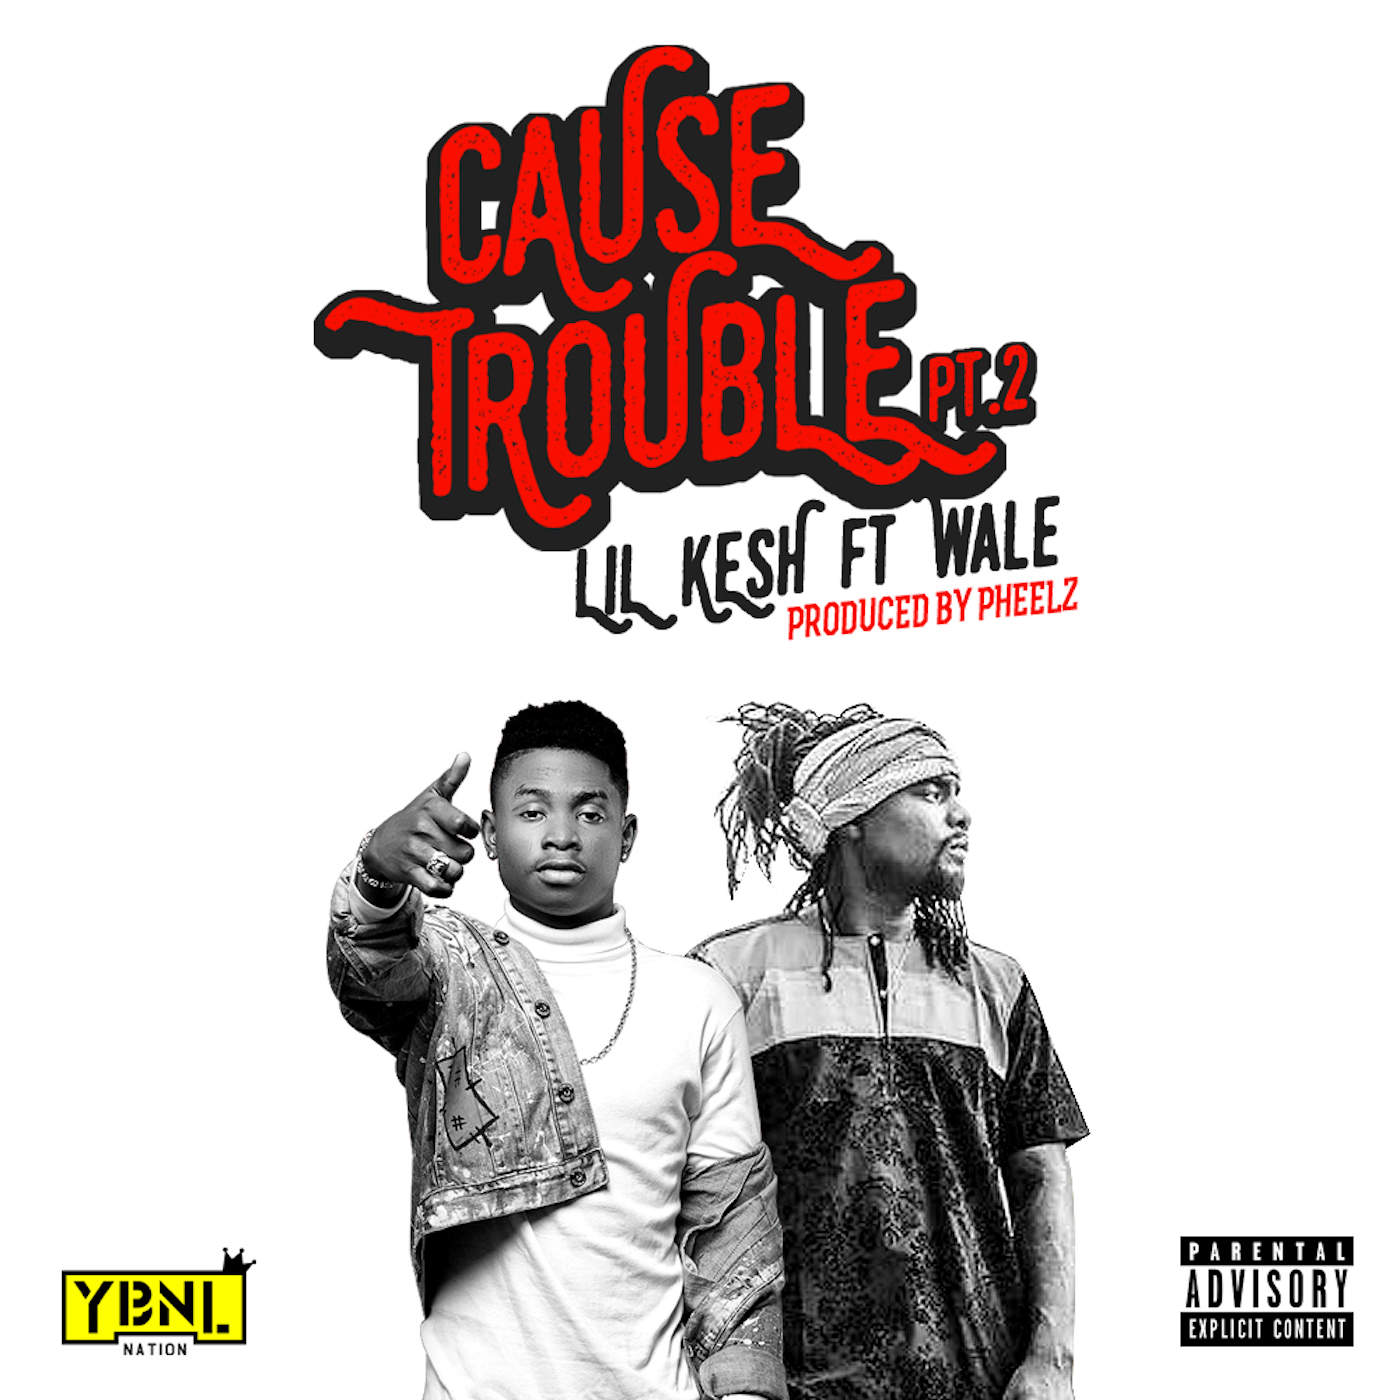 Lil Kesh ft. Wale - Cause Trouble pt. 2